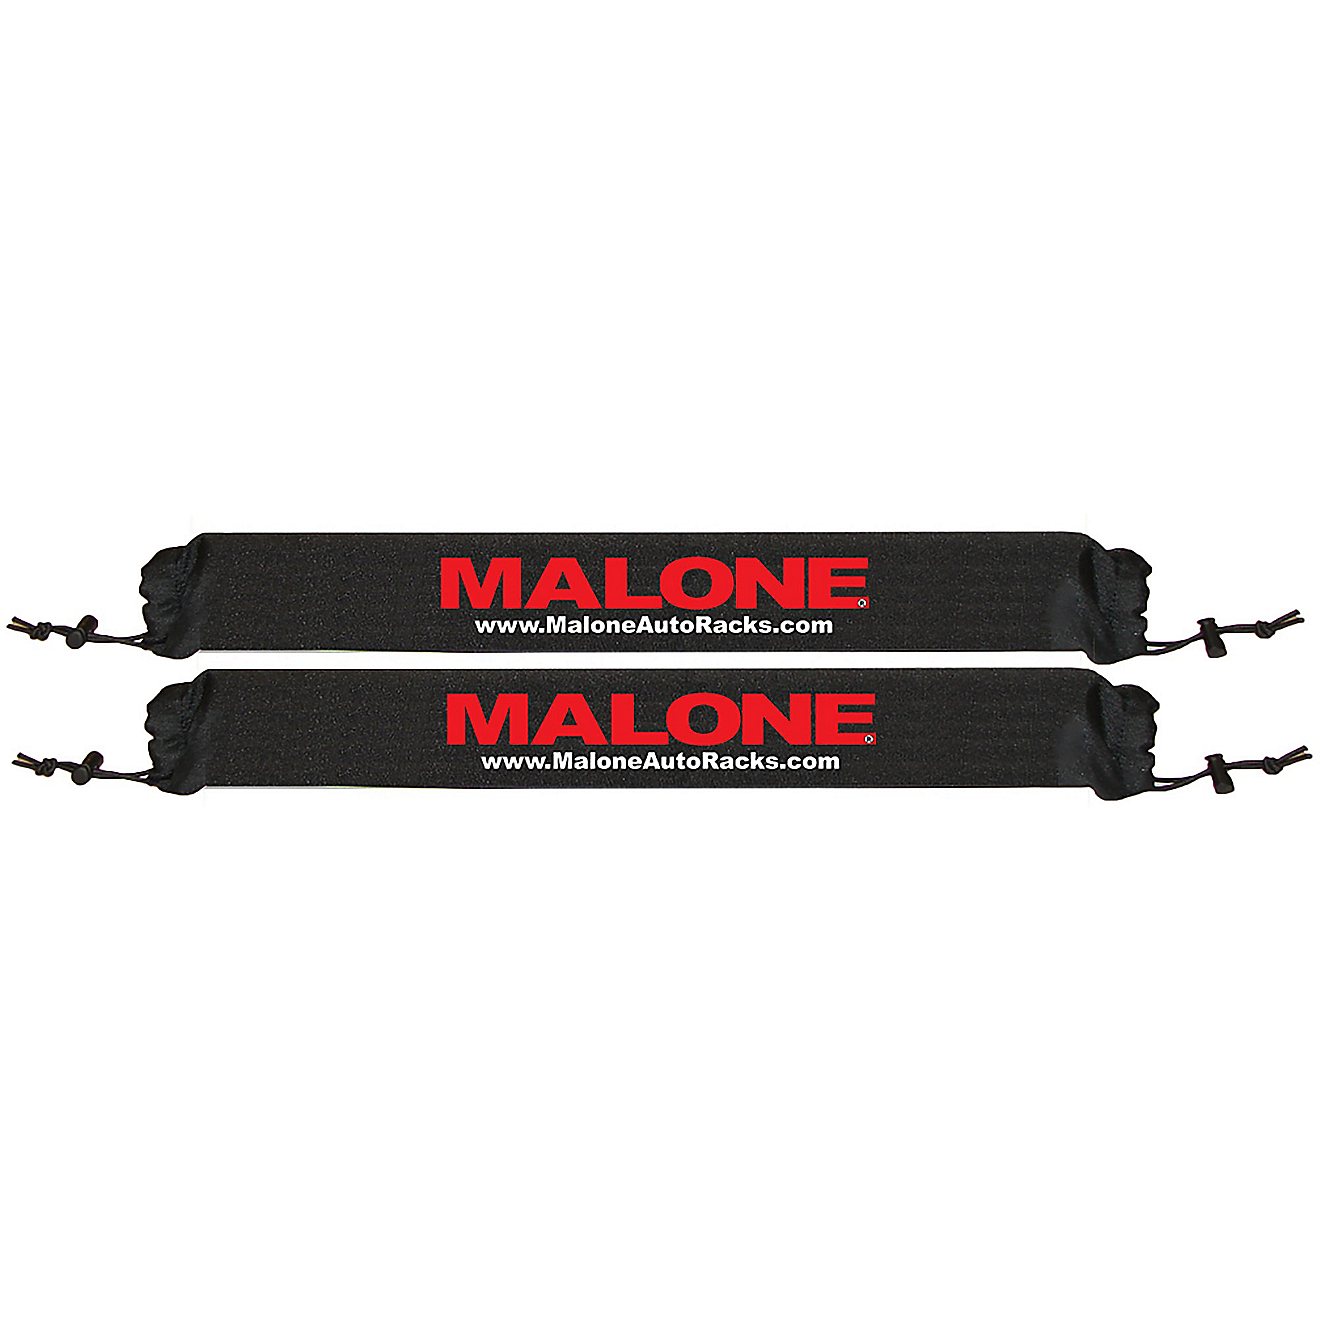 Malone Auto Racks 25 in Rack Pads 2-Pack                                                                                         - view number 1